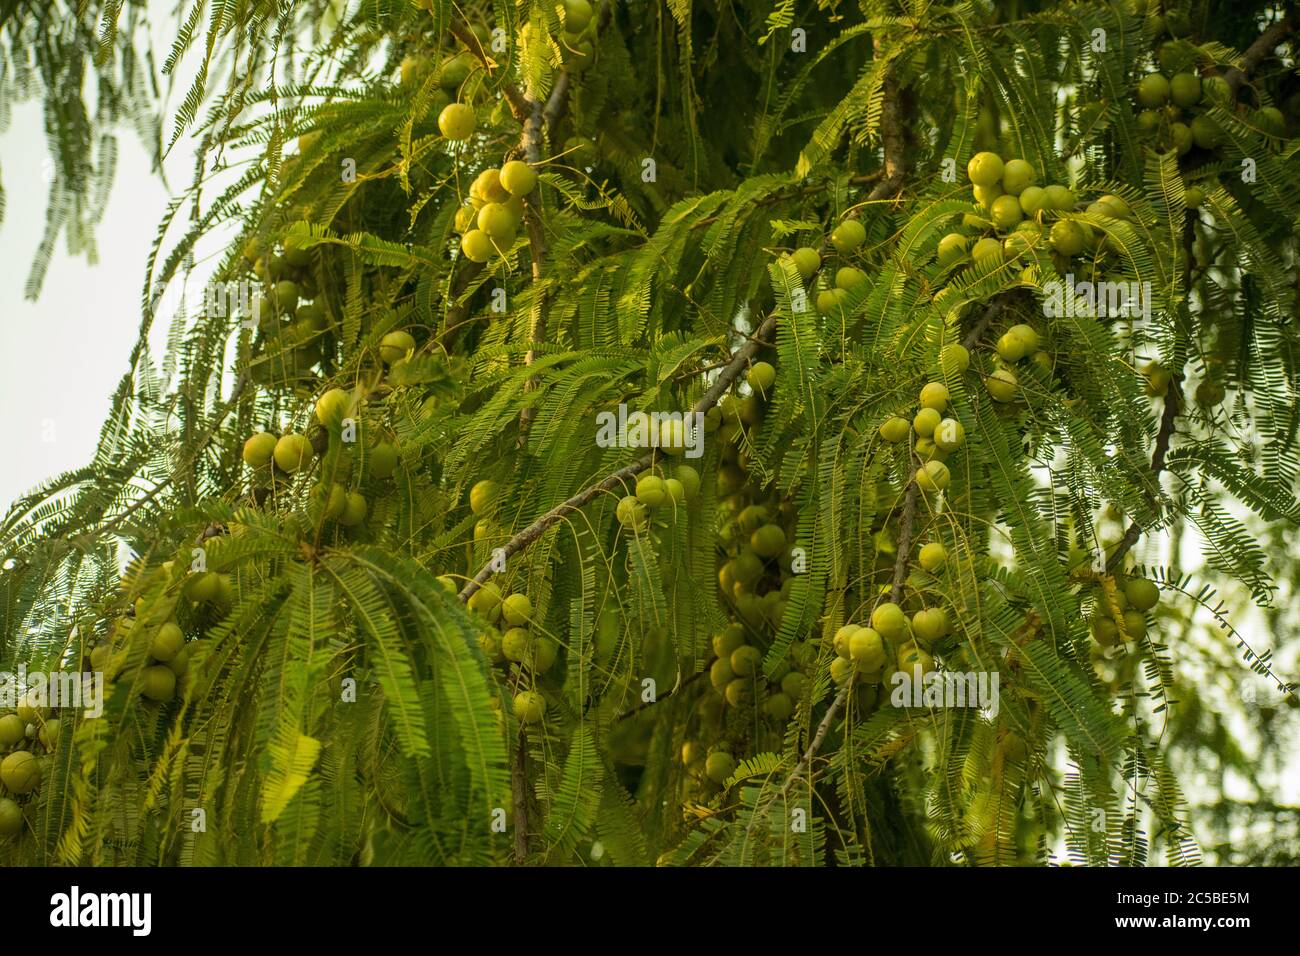 Indian gooseberry, Malacca tree or amla from Sanskrit amalika, is a deciduous tree of the family Phyllanthaceae. Stock Photo